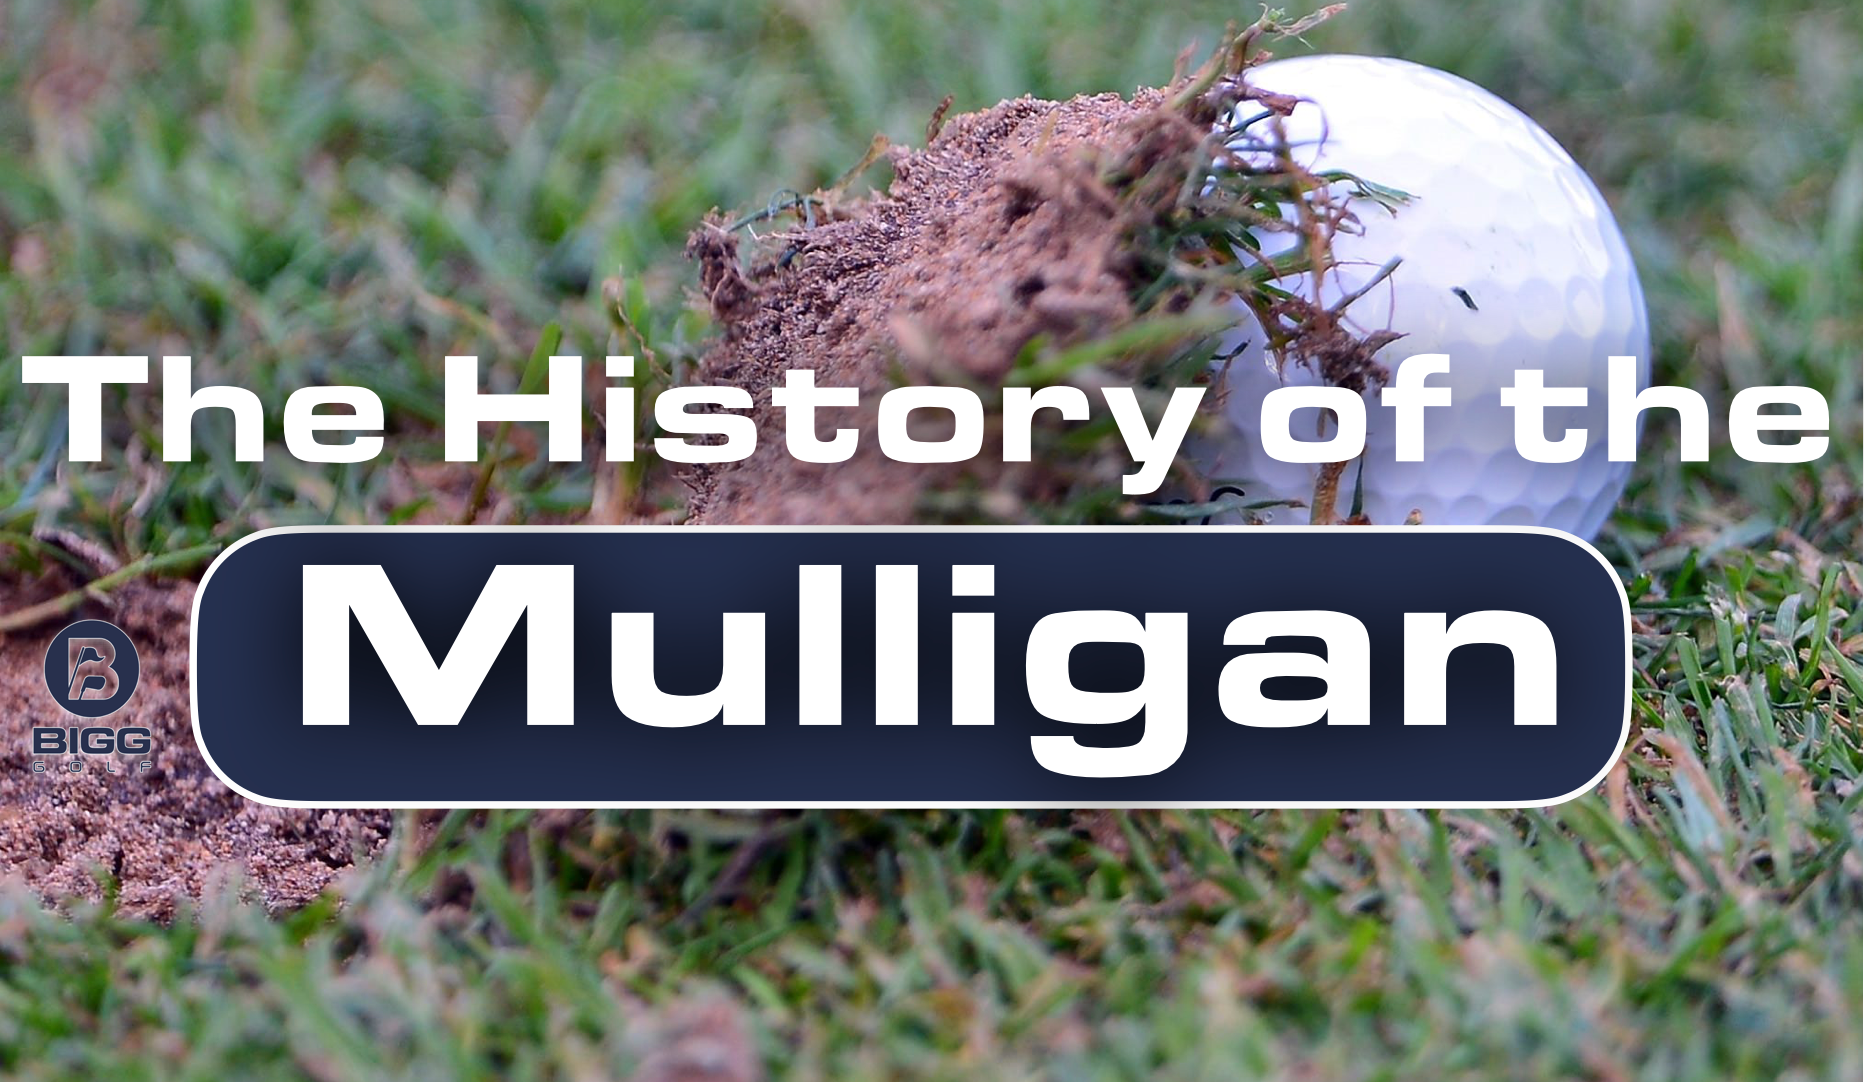 The History of the Mulligan - Golf's Beloved "Second Chance" Shot